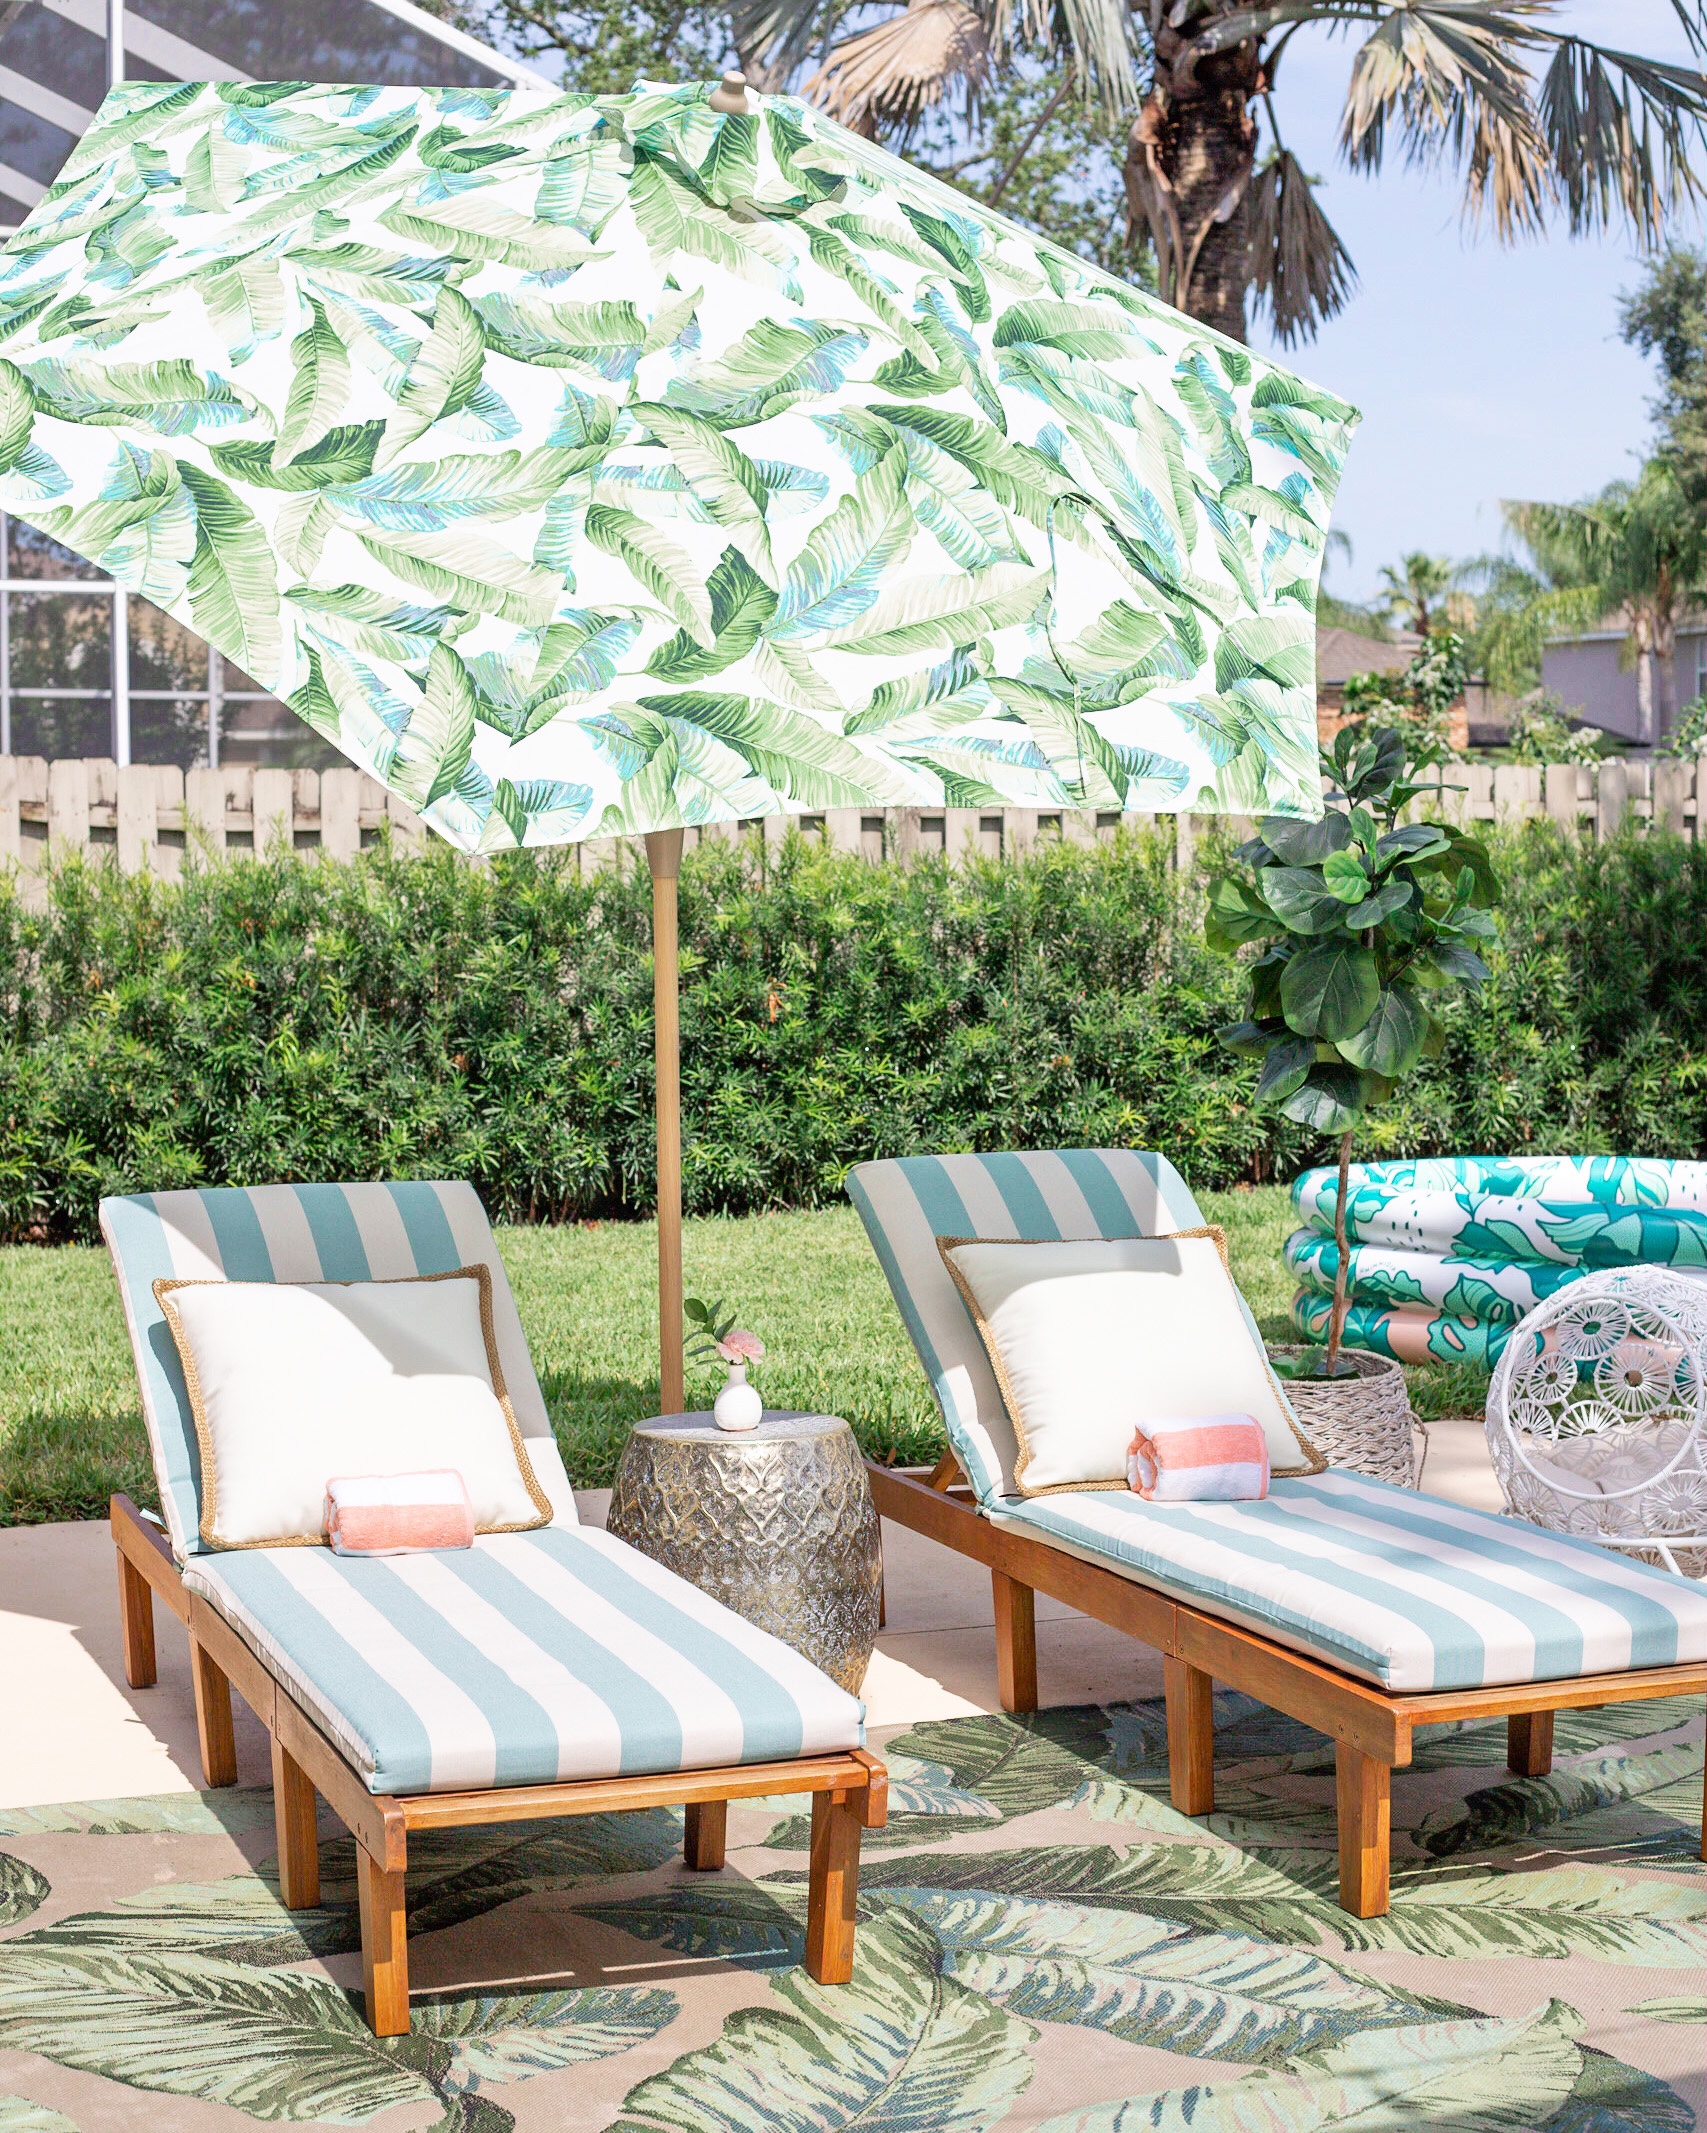 AFFORDABLE PALM BEACH STYLED PATIO